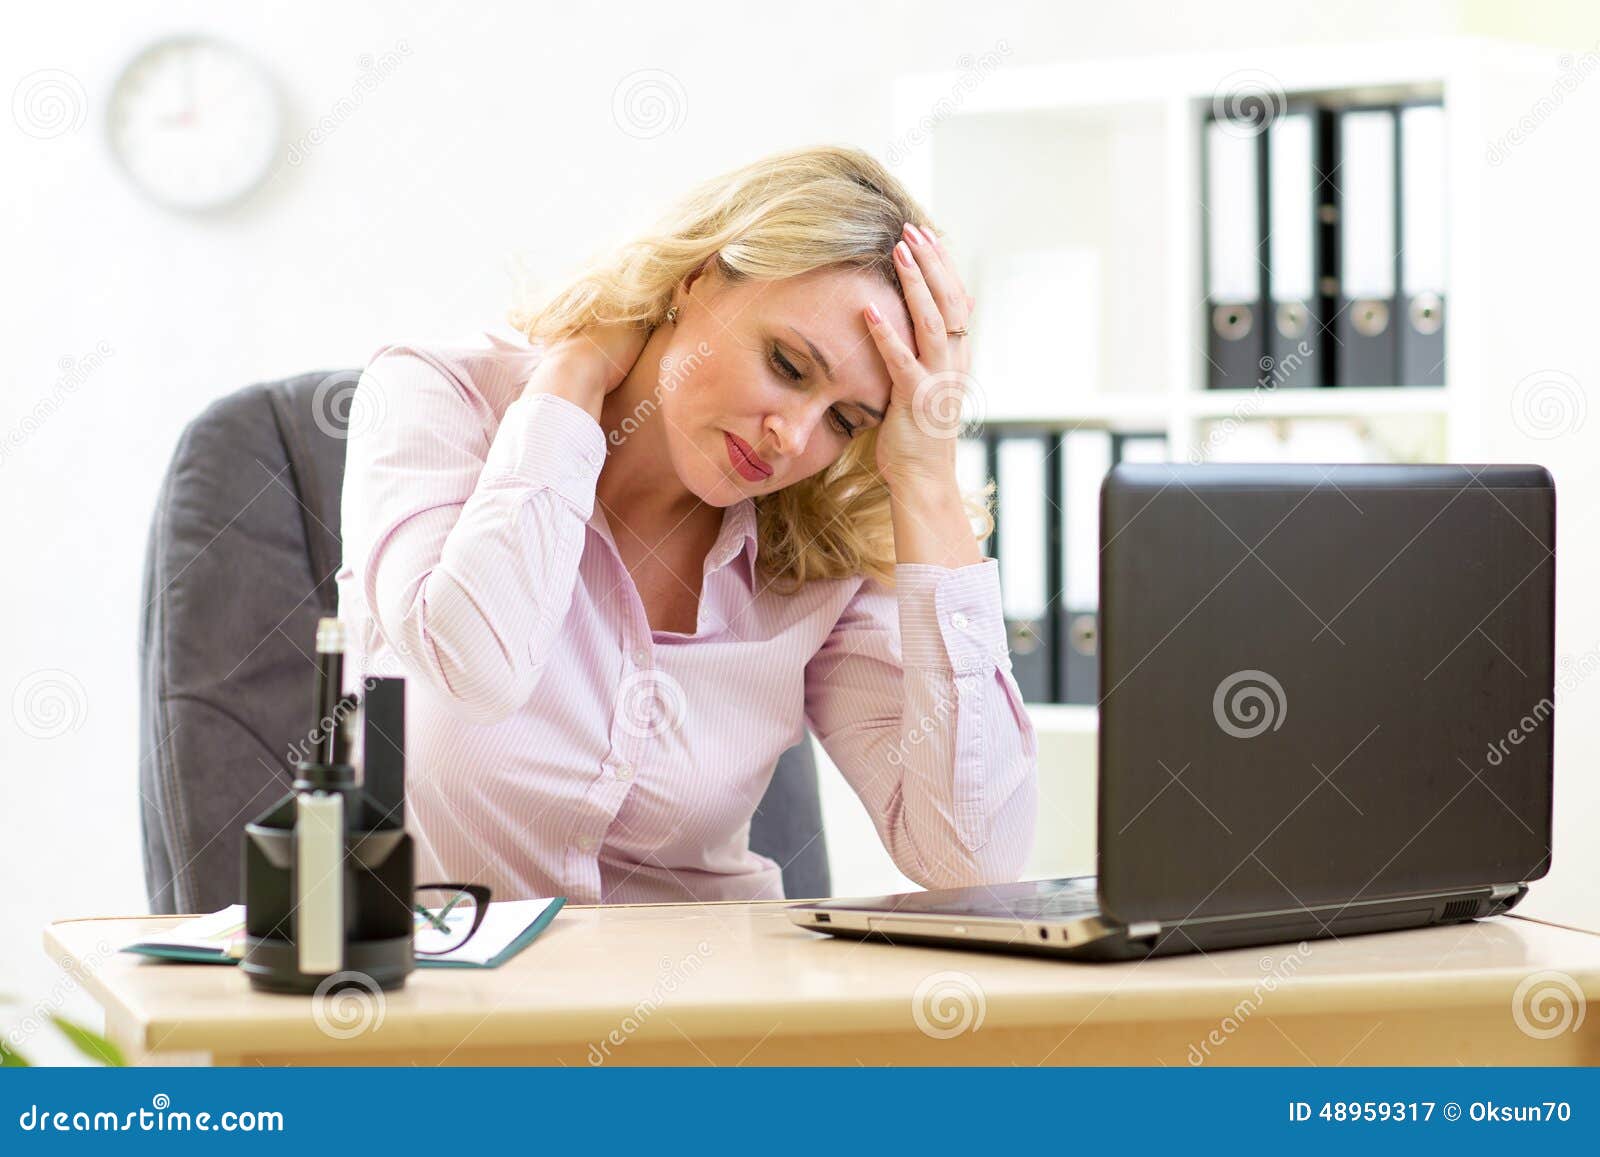 business woman with headache having stress in the office